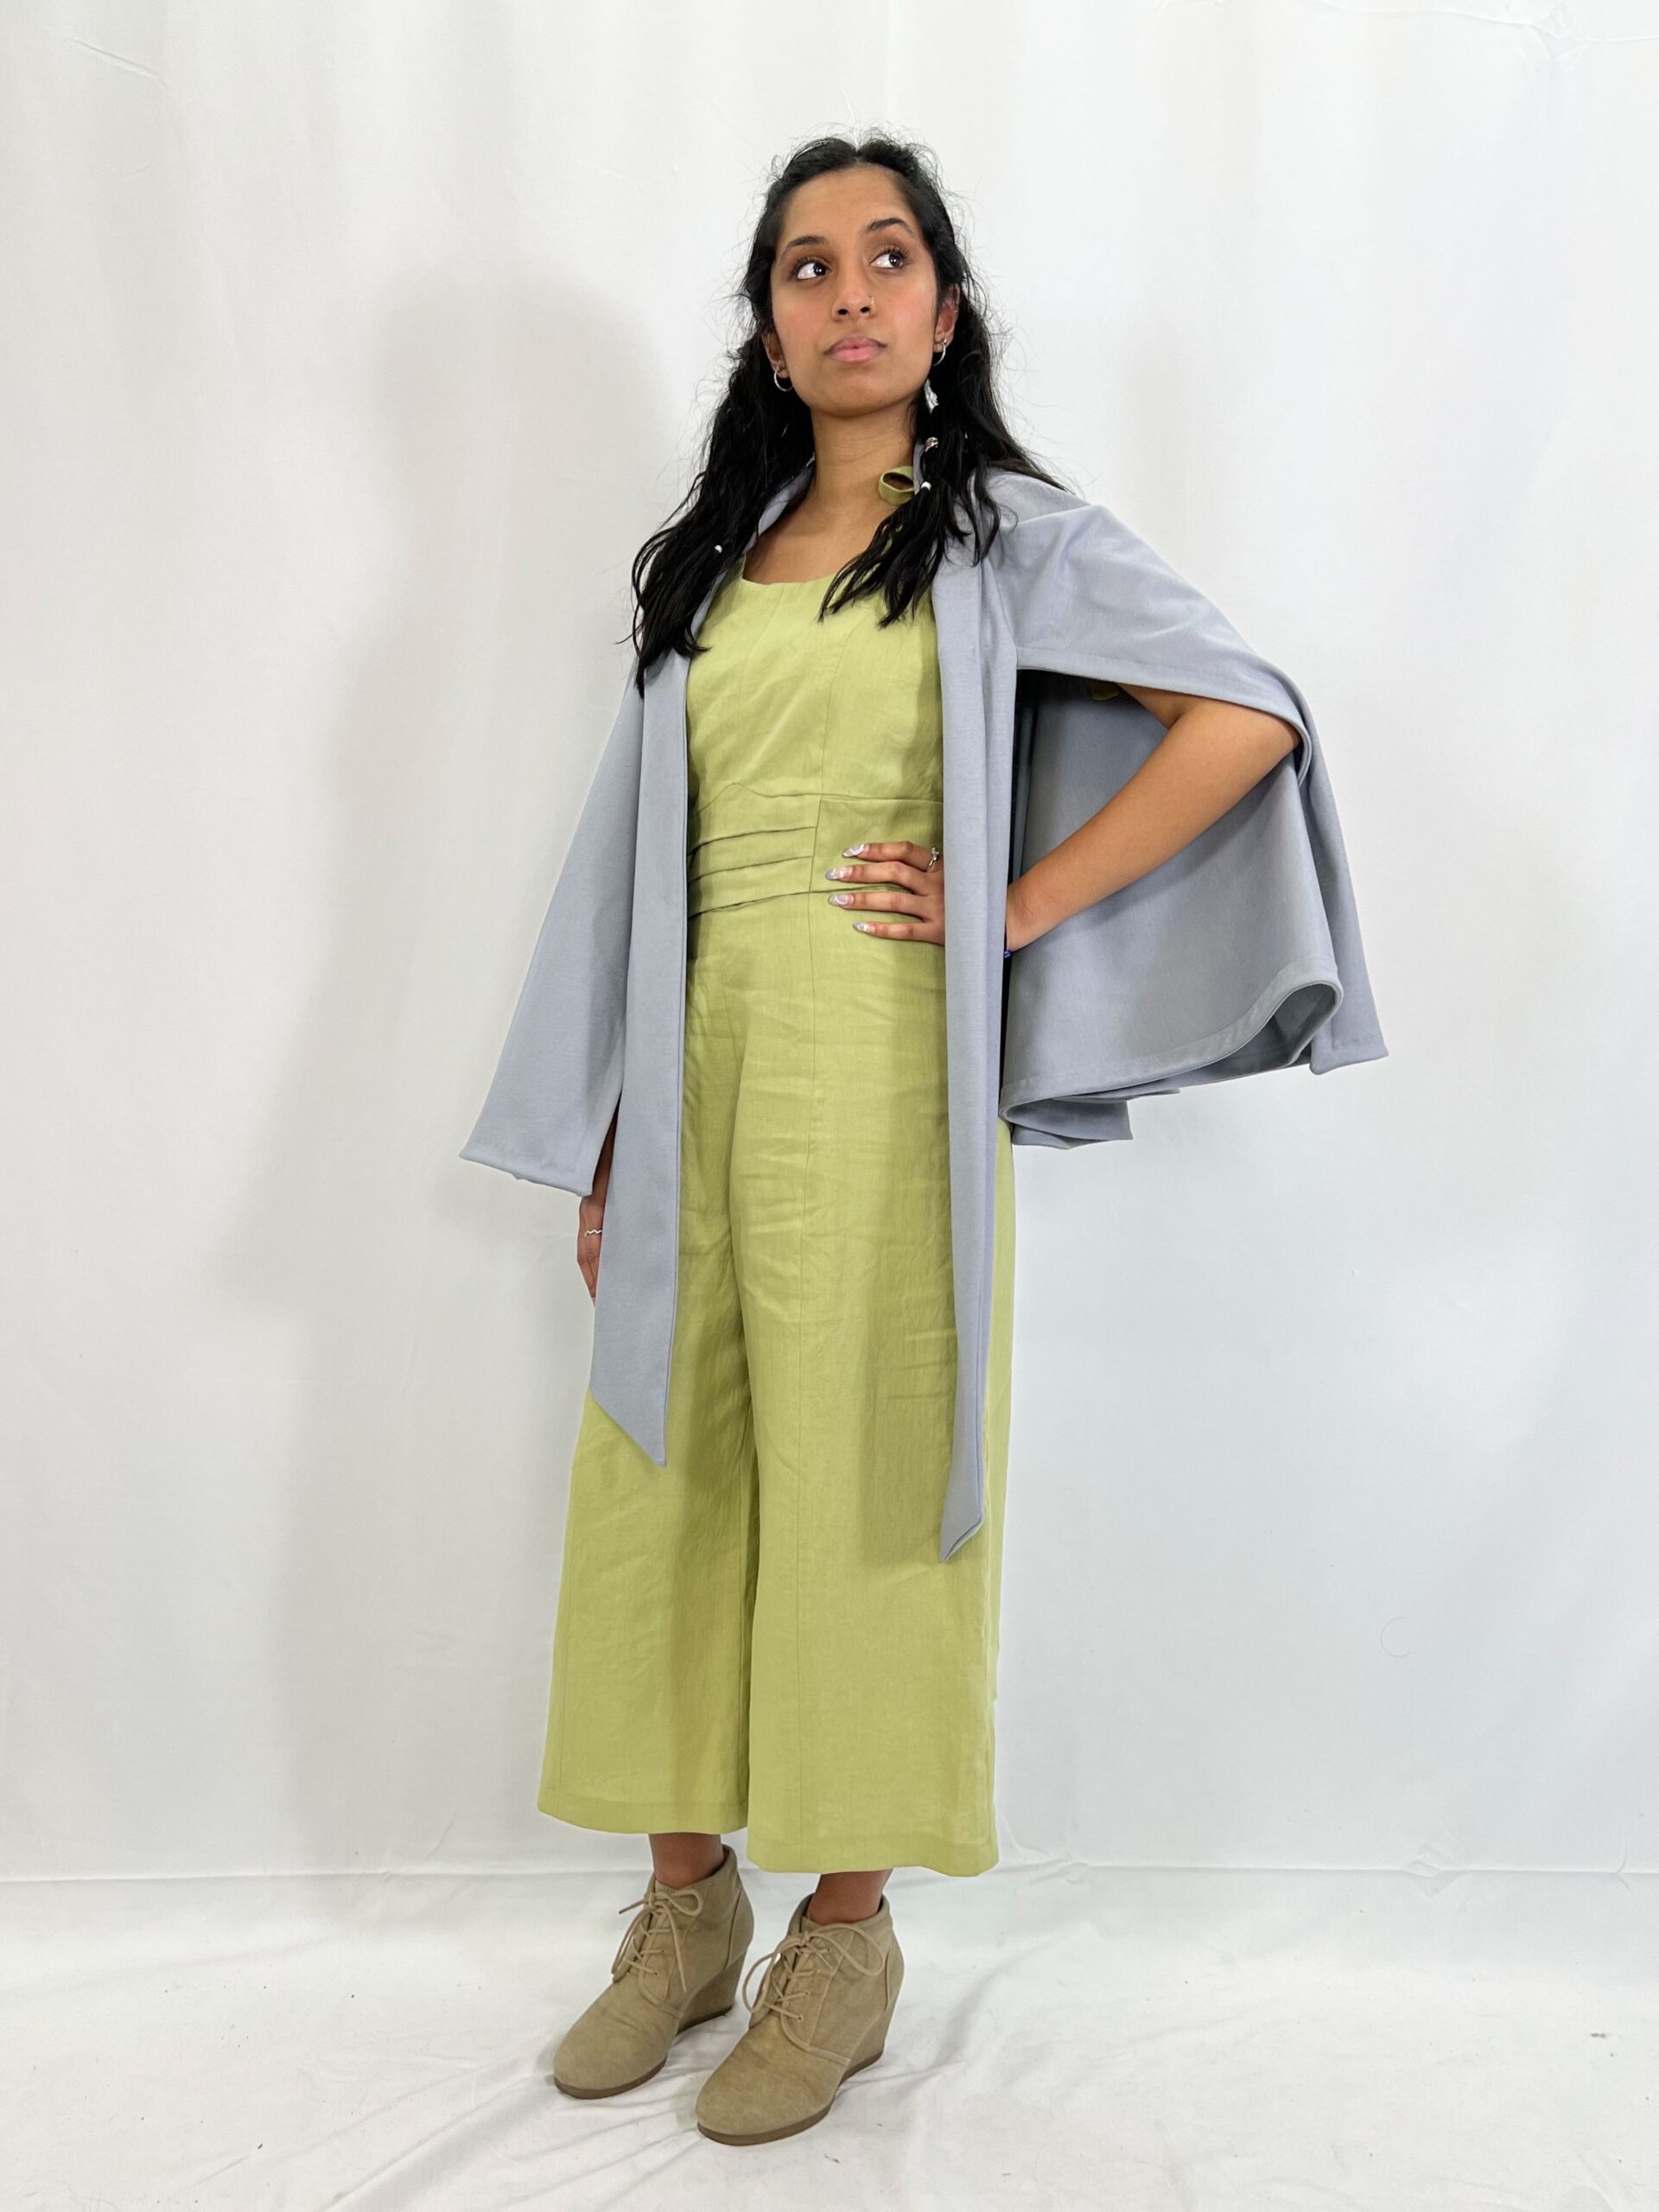 The Isabeau look includes a wool knit cape that can be worn in different ways, and a cotton jumpsuit with princess seams, welt pockets, and a pleated waistband that ties in the back. Modelled by Alana Naraine.